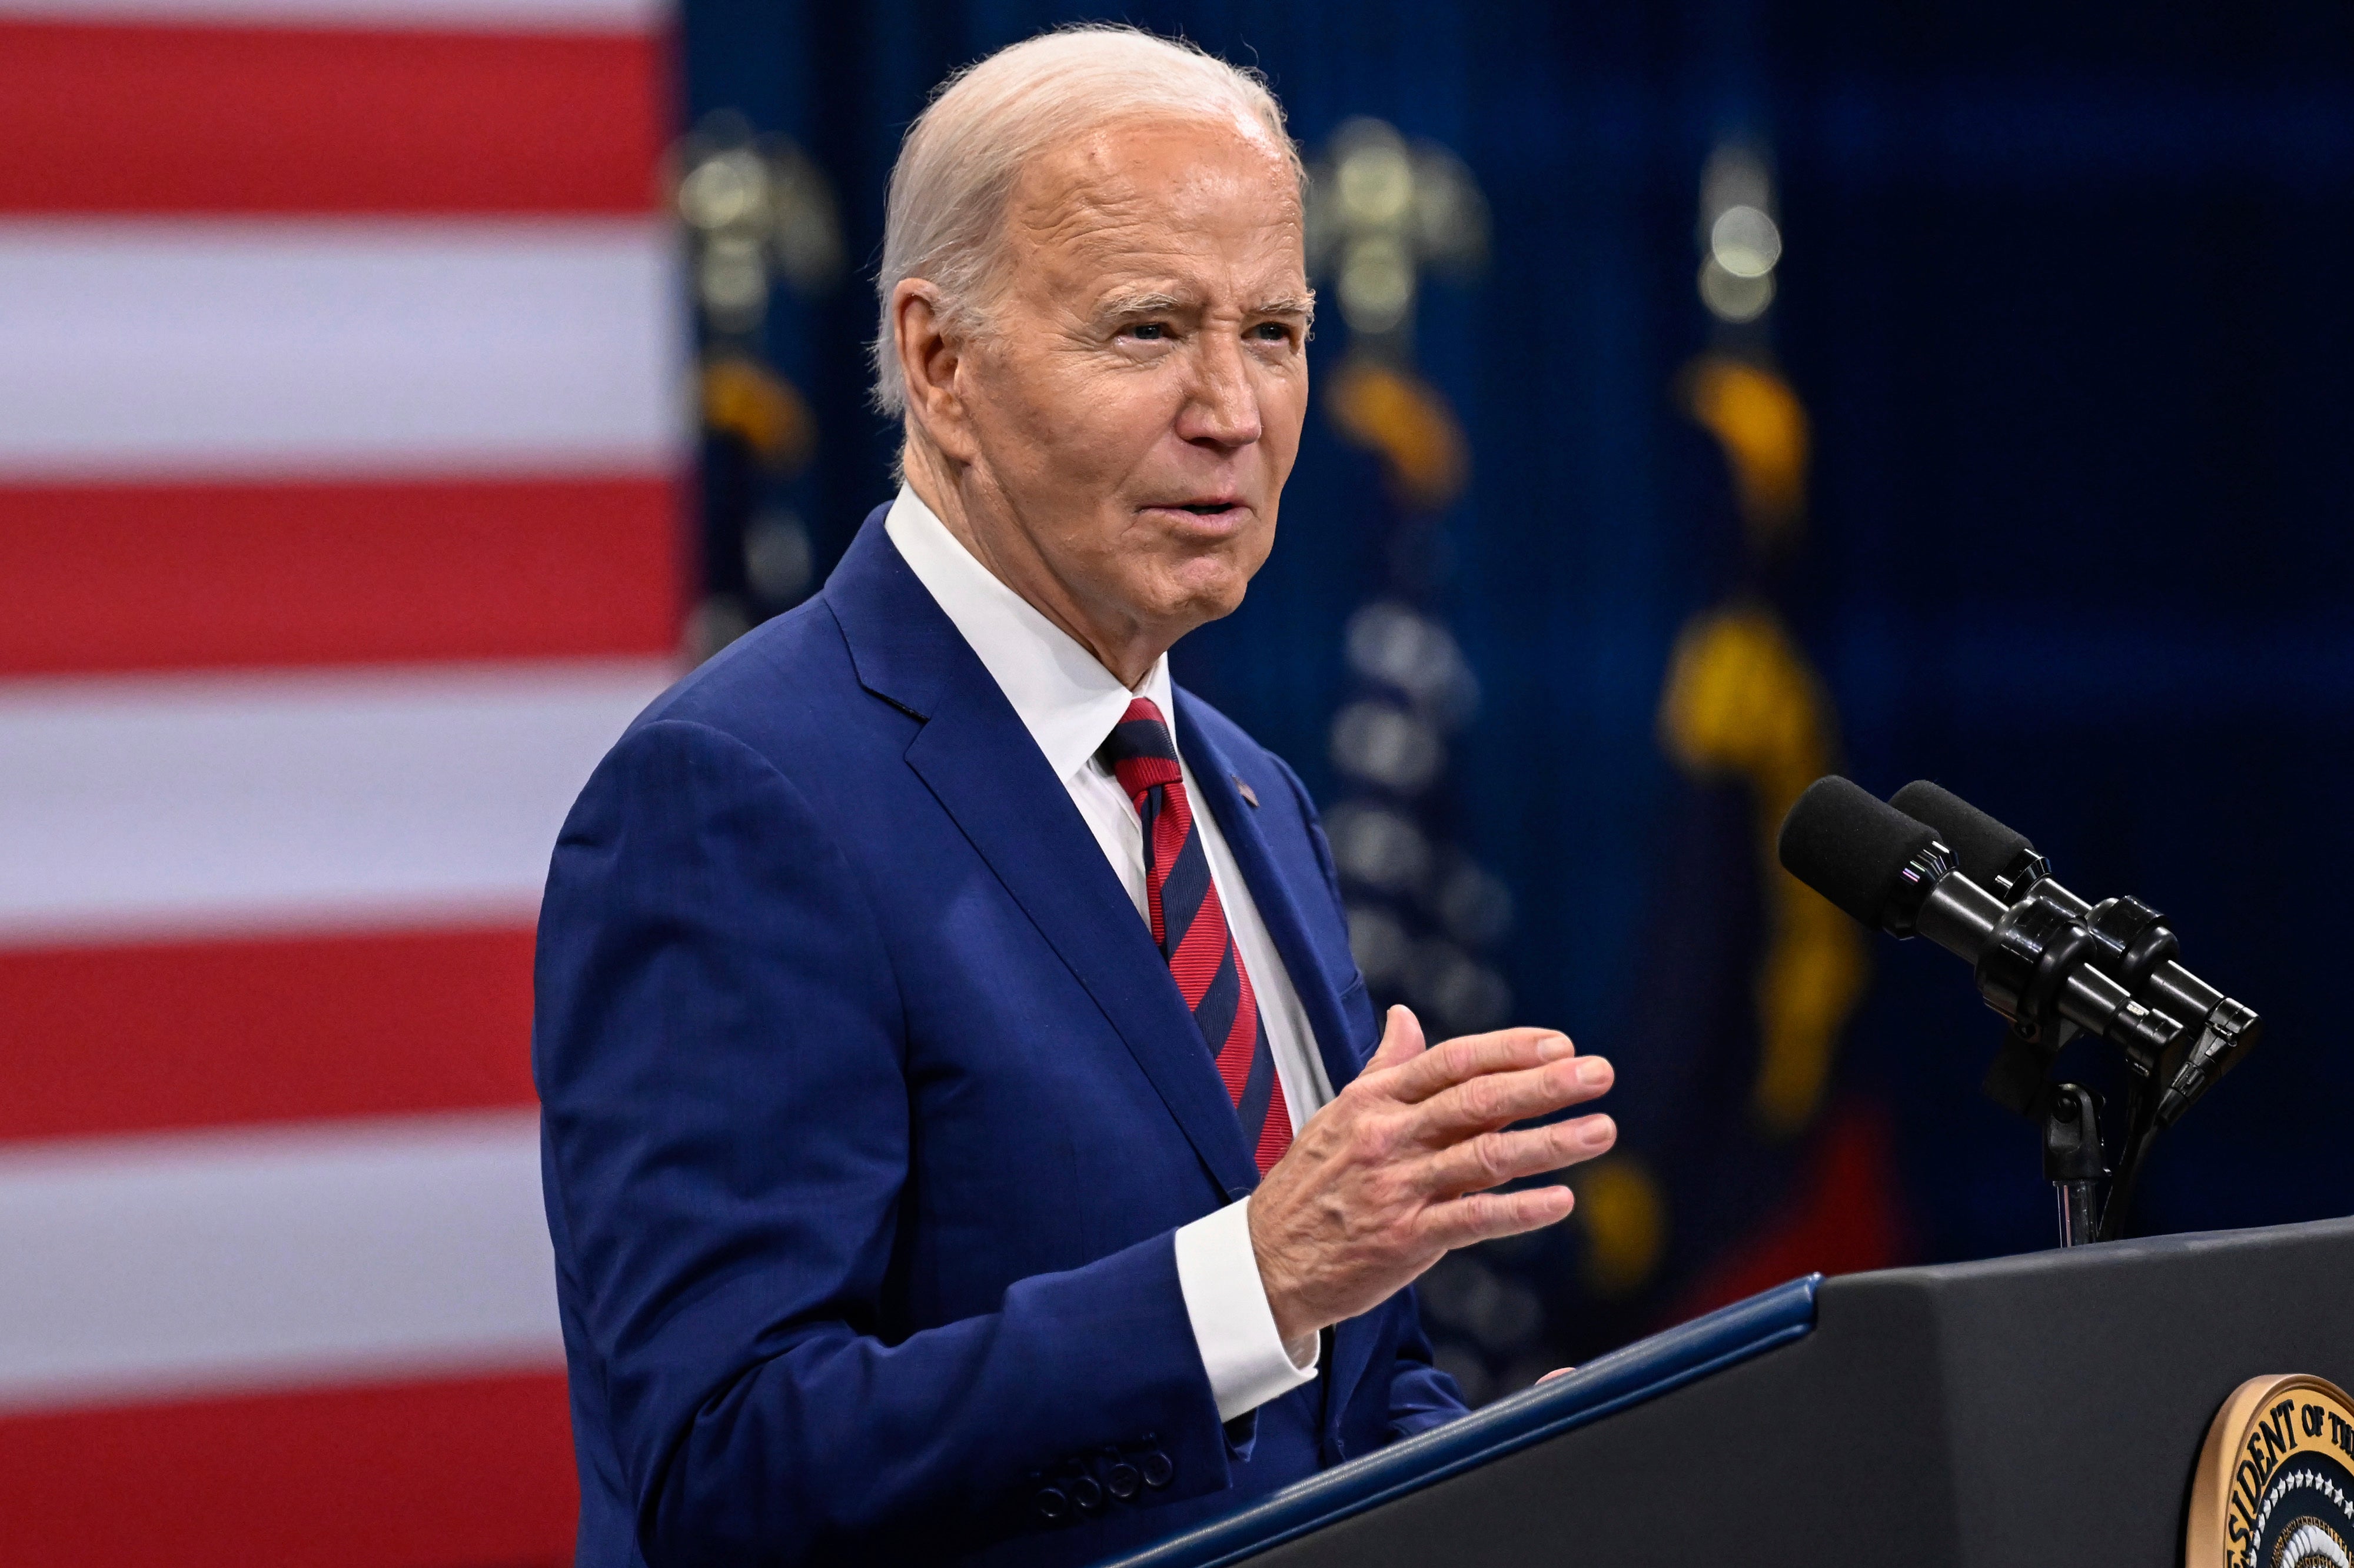 President Joe Biden said he was ‘outraged and heartbroken’ by the killings